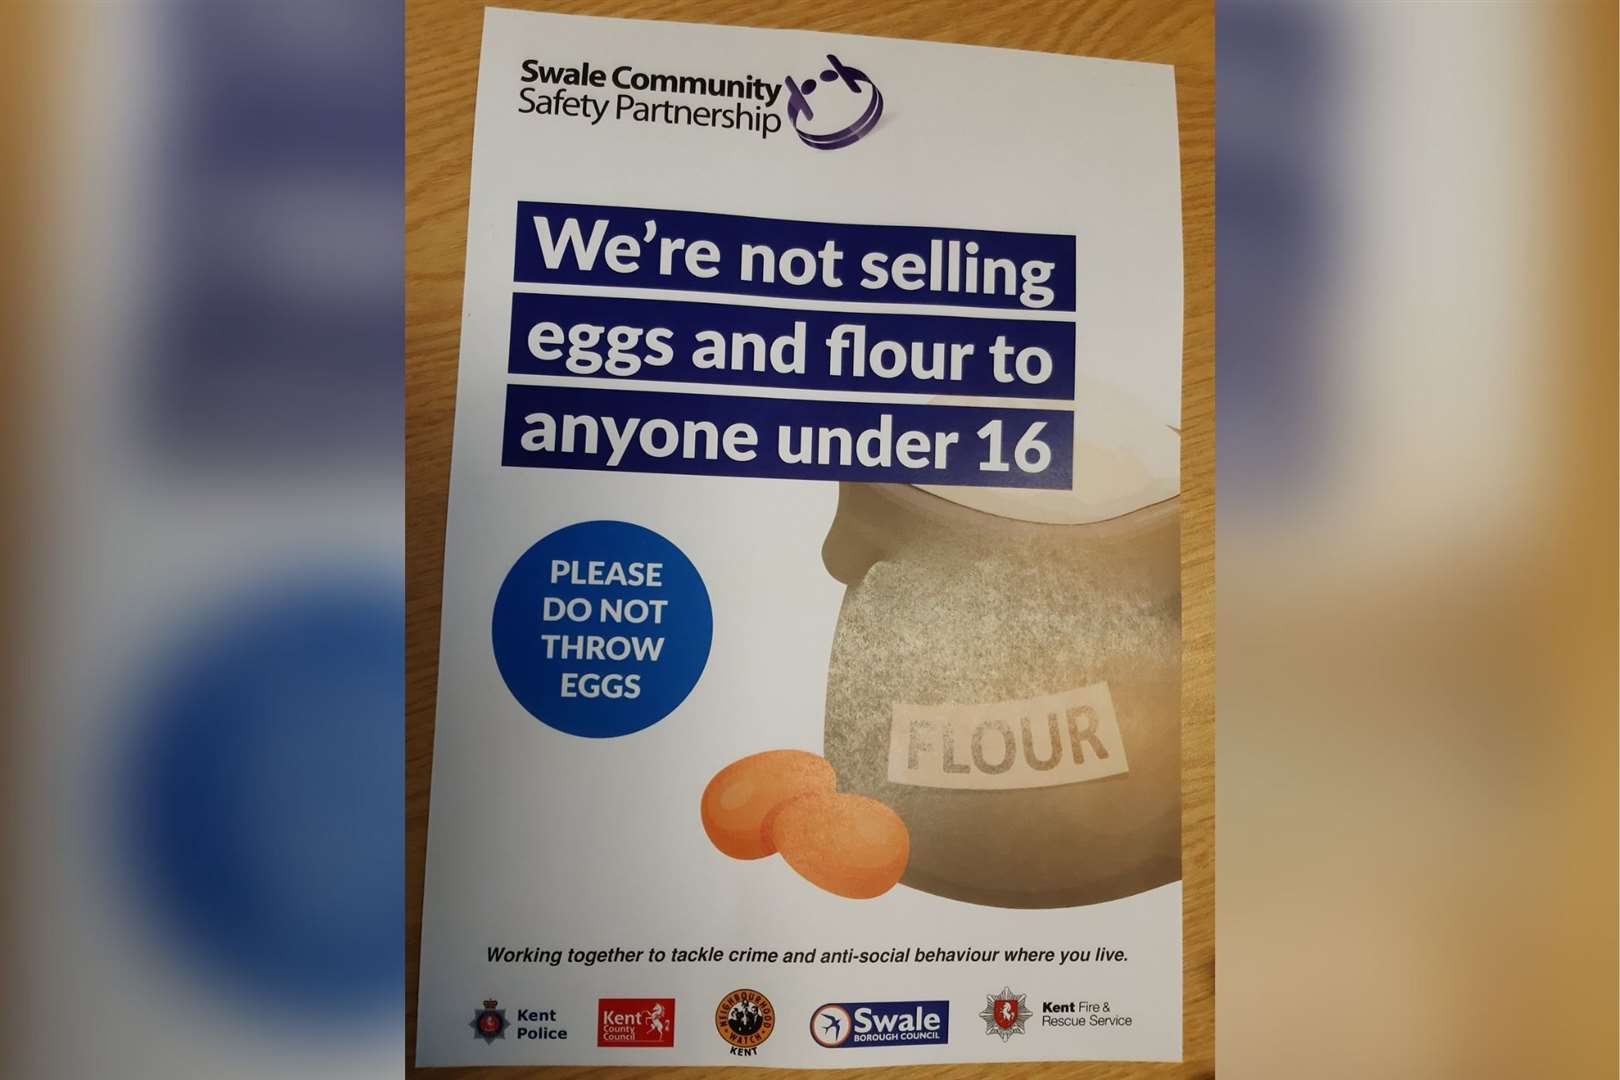 Shops across Swale have been told ahead of Halloween not to sell eggs and flour to under 16s. Picture: Kent Police Swale